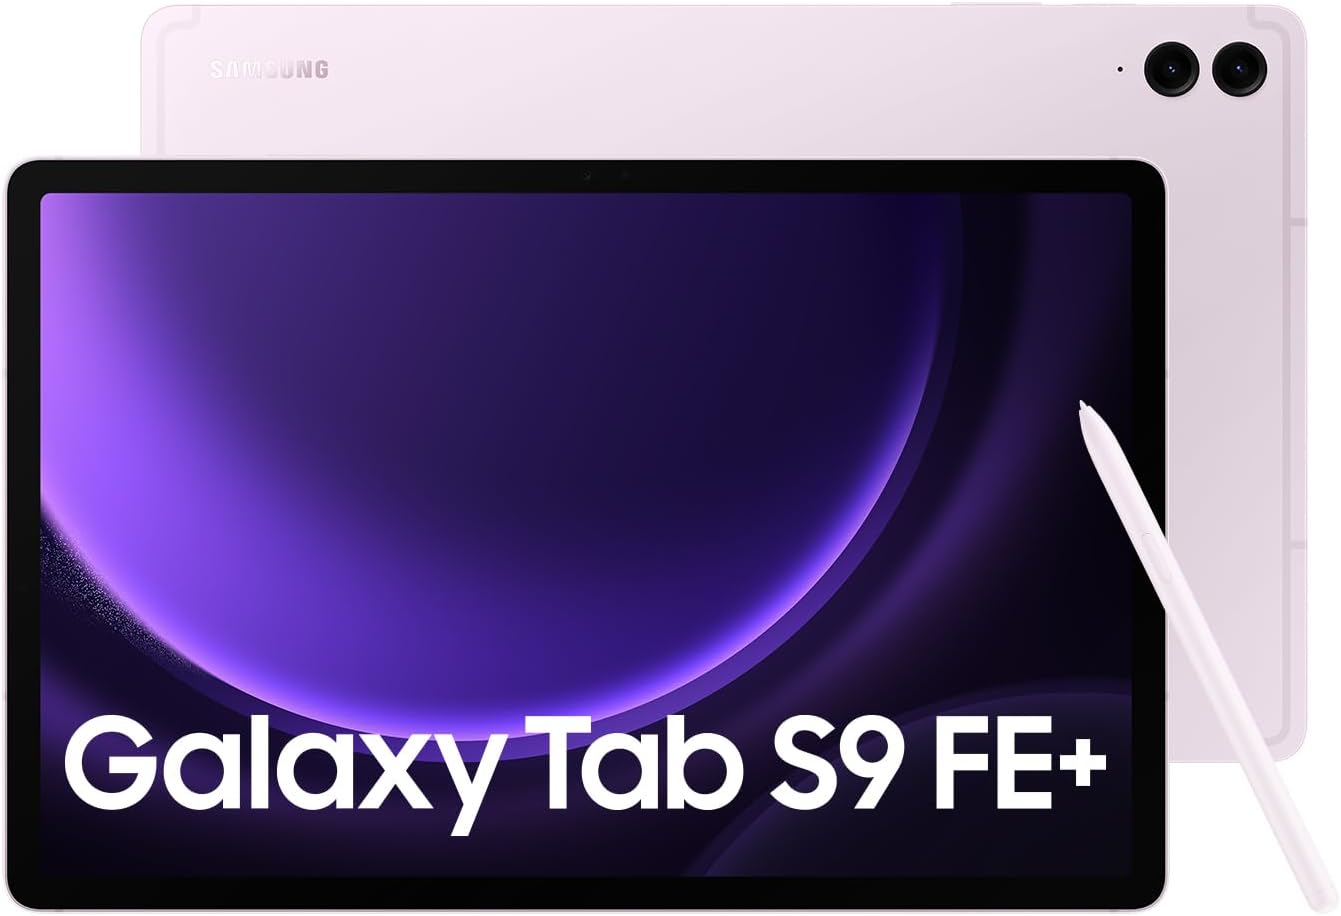 Lavender Samsung Galaxy Tab S9 FE+ 12.4 Screen, WiFi Android Tablet, 256GB, S Pen Included - Colorful design for creative possibilities and entertainment. 8806095159966